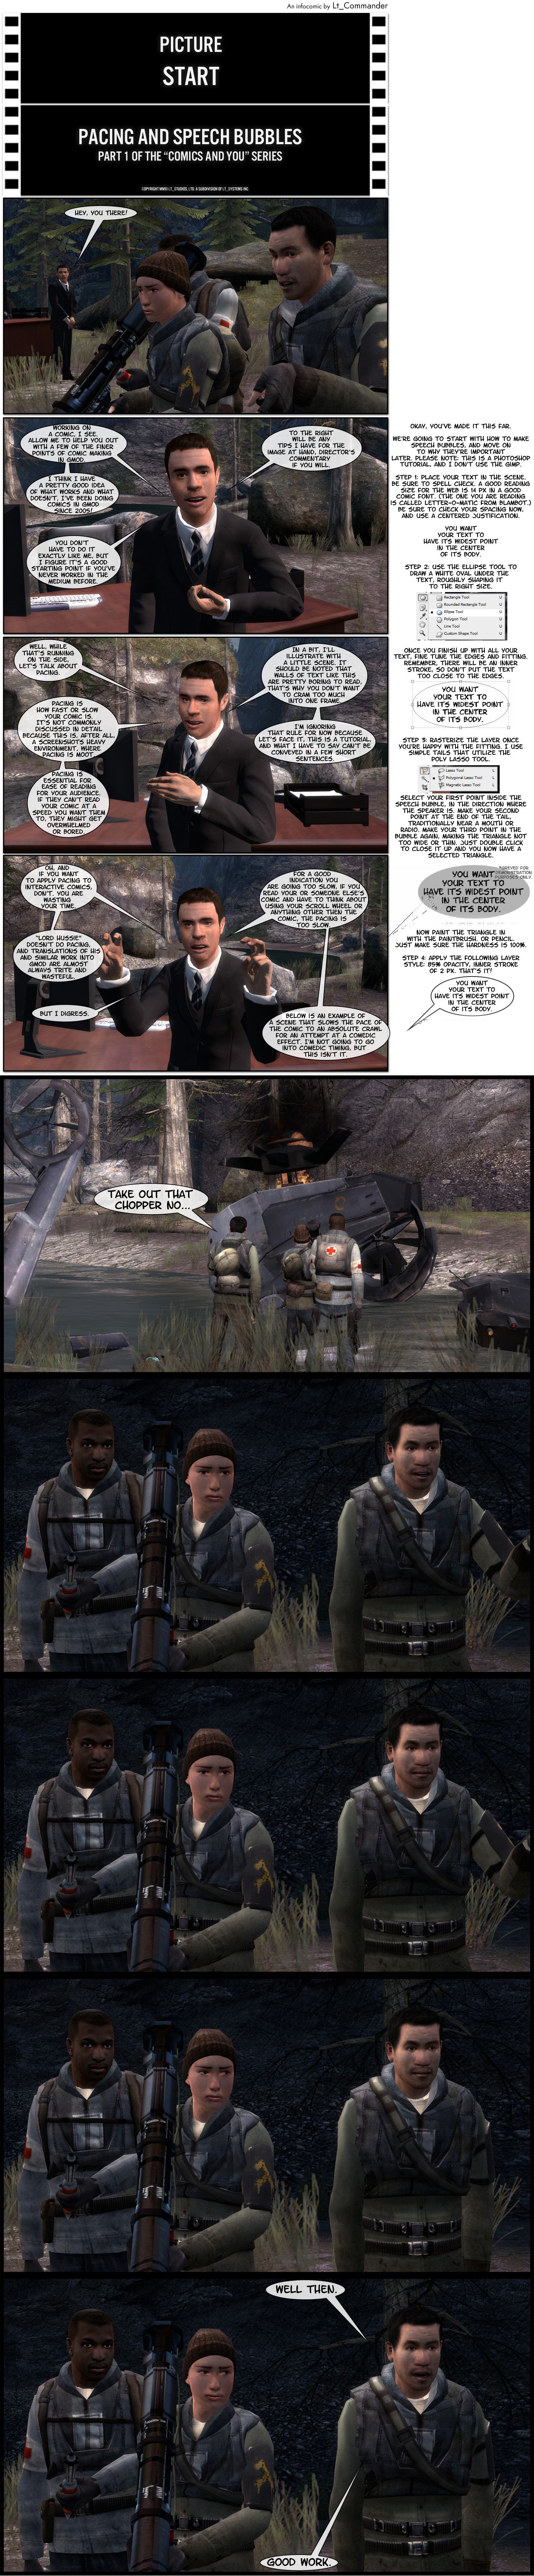 In a forest, three rebel models stand immobile, one of them holding a rocket launcher. Lt_Commander stands nearby alongside his desk and greets the reader. He notes they’re working on a comic and offers to help out with a few of the finer points of comic making in Garry’s Mod, noting that he thinks he has a pretty good idea of what works and what doesn’t as he’s been doing comics in GMod since 2005. He adds you don’t have to do it exactly like him, but he figures it’s a good starting point if you’ve never worked in the medium before. He states that to the right of the panel will be any tips he has for the image at hand, director’s commentary, if you will. A message on the right states okay, you’ve made it this far, we’re going to start with how to make speech bubbles and move on to why they’re important later. The message adds that this is a Photoshop tutorial as Lt_C doesn’t use GIMP. Step one is placing your text in the scene, making sure to spell check, and a good reading size for the web is 14 pixels in a good comic font, with the one he’s using is Letter-O-Matic from Blambot. Be sure to check your spacing now and use a centered justification. He demonstrates how you want your text to have its widest point in the center of its body. Step two, use the ellipse tool to draw a white oval under the text, roughly shaping it to the right size. Once you finish up with all your text, fine-tune the edges and fitting, remember, there will be an inner stroke, so don’t put the text too close to the edges. Step three, rasterize the layer once you’re happy with the fitting, with Lt_C noting he uses simple tails that utilize the polygonal lasso tool. Select your first point inside the speech bubble, in the direction where the speaker is, make your second point at the end of the tail, traditionally near a mouth or radio, make your third point in the bubble again, making the triangle not too wide or thin, then just double click to close it up and you now have a selected triangle. Now paint the triangle in with the paintbrush or pencil, making sure the hardness is 100%. Step four, apply the following layer style: 85% opacity, inner stroke of 2 pixels and that’s it. Lt_C then switches topics to pacing, explaining that pacing is how fast or slow your comic is and it’s not commonly discussed in detail because this is, after all, a screenshots-heavy environment, where pacing is moot, but Lt_C points out pacing is essential for ease of reading for your audience. If they can’t read your comic at a speed you want them to, they might get overwhelmed or bored. Lt_C states in a bit he’ll illustrate with a little scene, noting that walls of text like this are pretty boring to read, which is why you don’t want to cram too much into one frame, and he’s ignoring that rule for now because, let’s face it, this is a tutorial and what he has to say can’t be conveyed in a few short sentences. Lt_C then recommends, if you want to apply pacing to interactive comics, don’t, you are wasting your time. Lord Hussie, he says, doesn’t do pacing and translations of his and similar work into GMod are almost always trite and awful. Lt_C then says he digresses and that, for a good indication you are going too slow, if you read your or someone else’s comic and have to think about using your scroll wheel or anything other than the comic, the pacing is too slow. Lt_C then offers an example of a scene that slows the pace of the comic to an absolute crawl for an attempt at a comedic effect. Lt_C adds that he’s not going to go into comedic timing, but this isn’t it. We see the three rebels standing in the river in front of a downed Hunter-Chopper. One of them is telling another to take out that hunter-chopper now. They then stare at the chopper, the one that was talking with his mouth agape. He closes the mouth, then lowers his arm as the rebel with the rocket launcher stares at him. He then says well then, good work and the other rebel smiles.